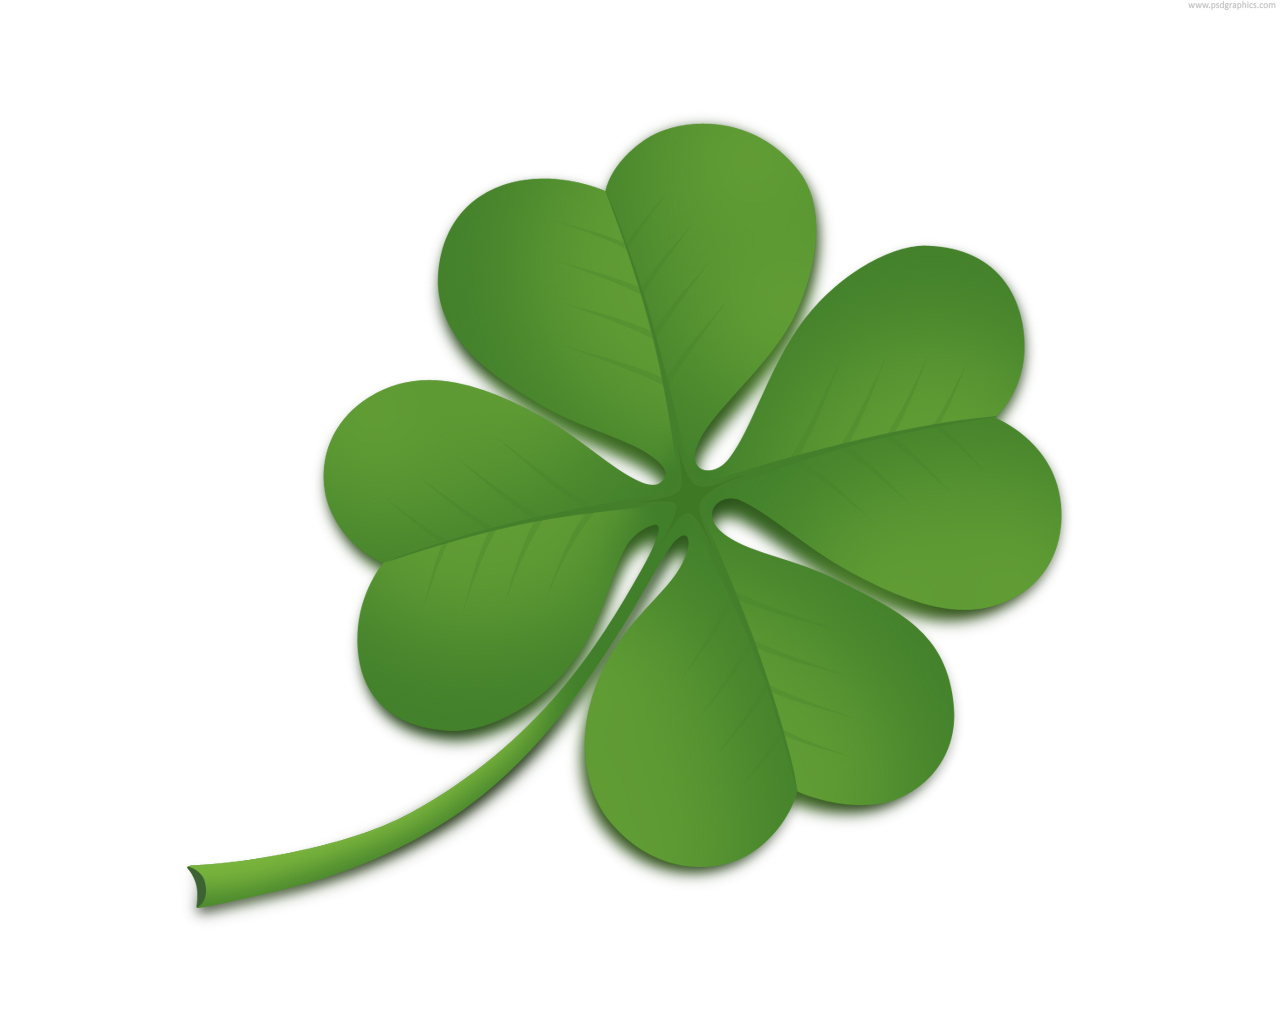 free 4 leaf clover clipart